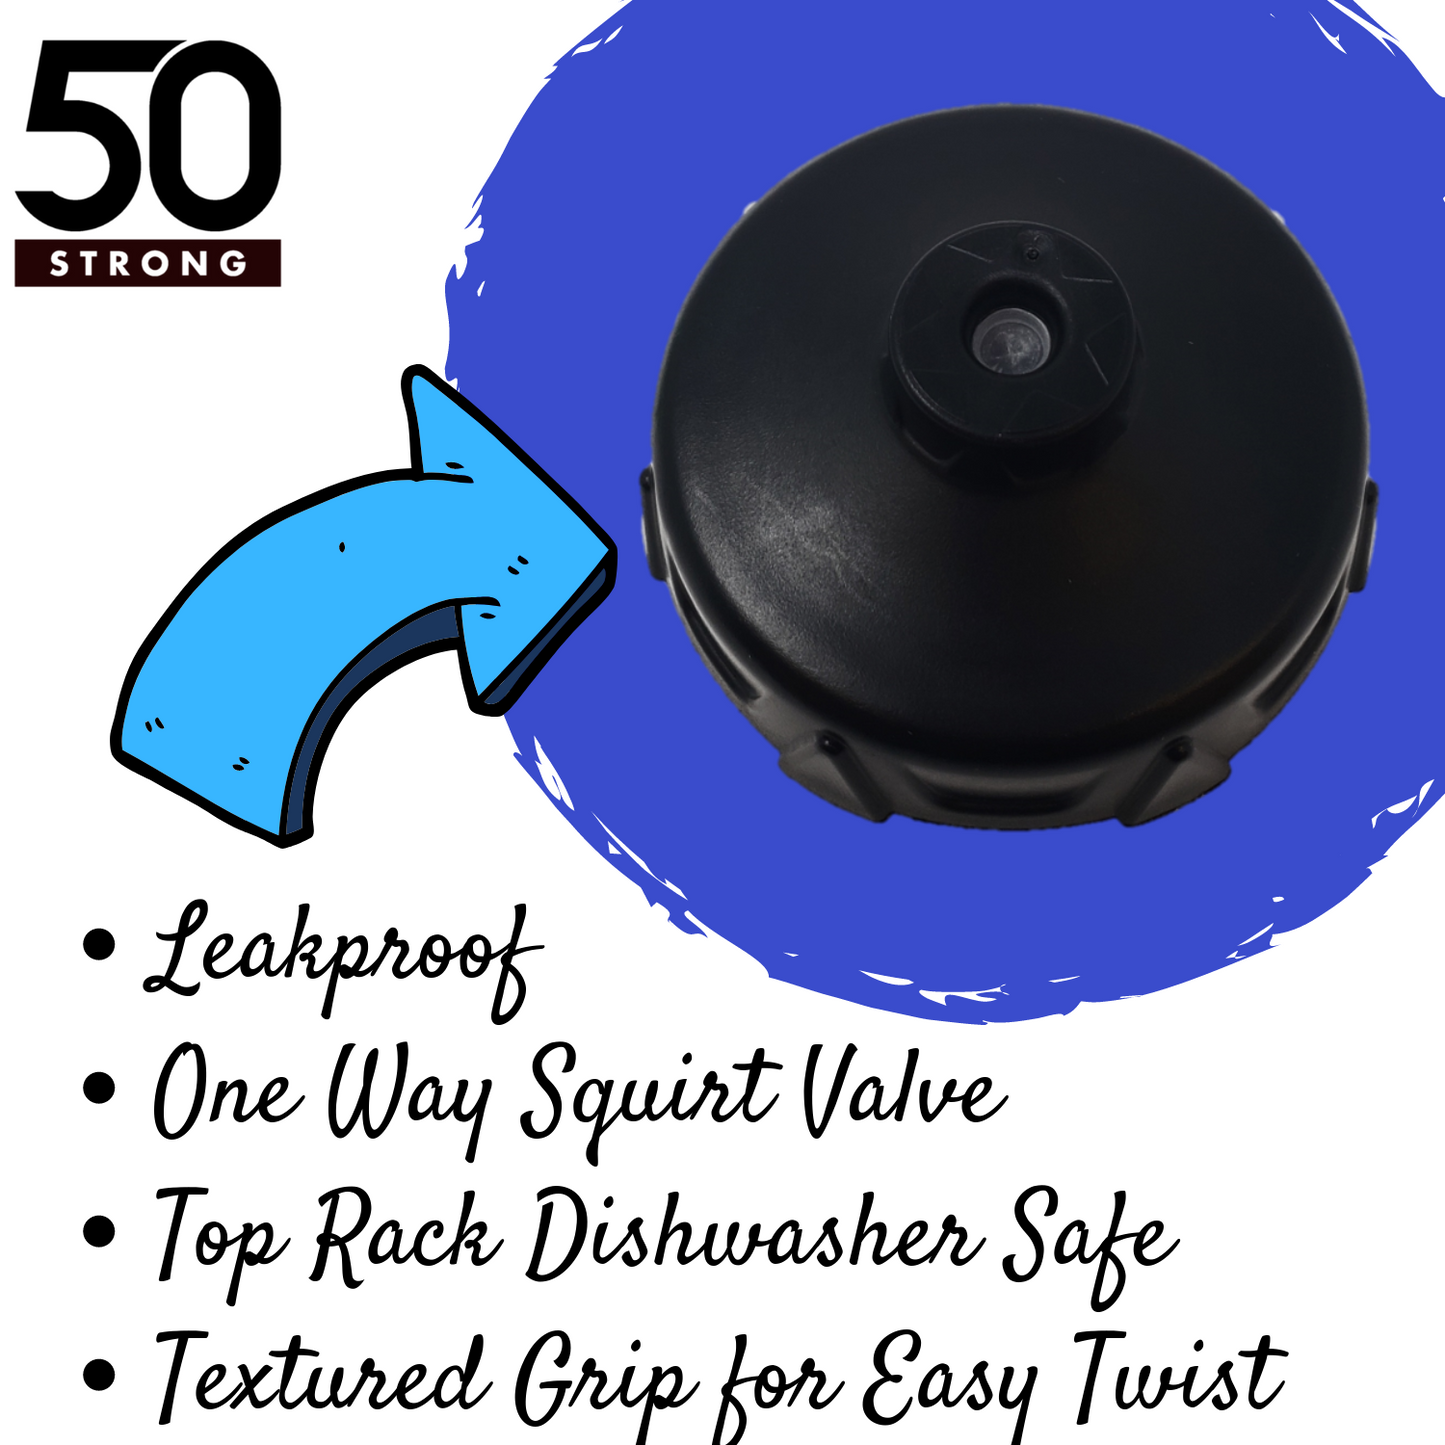 Jet Stream Cap with One-Way Valve (Black) - 50 Strong